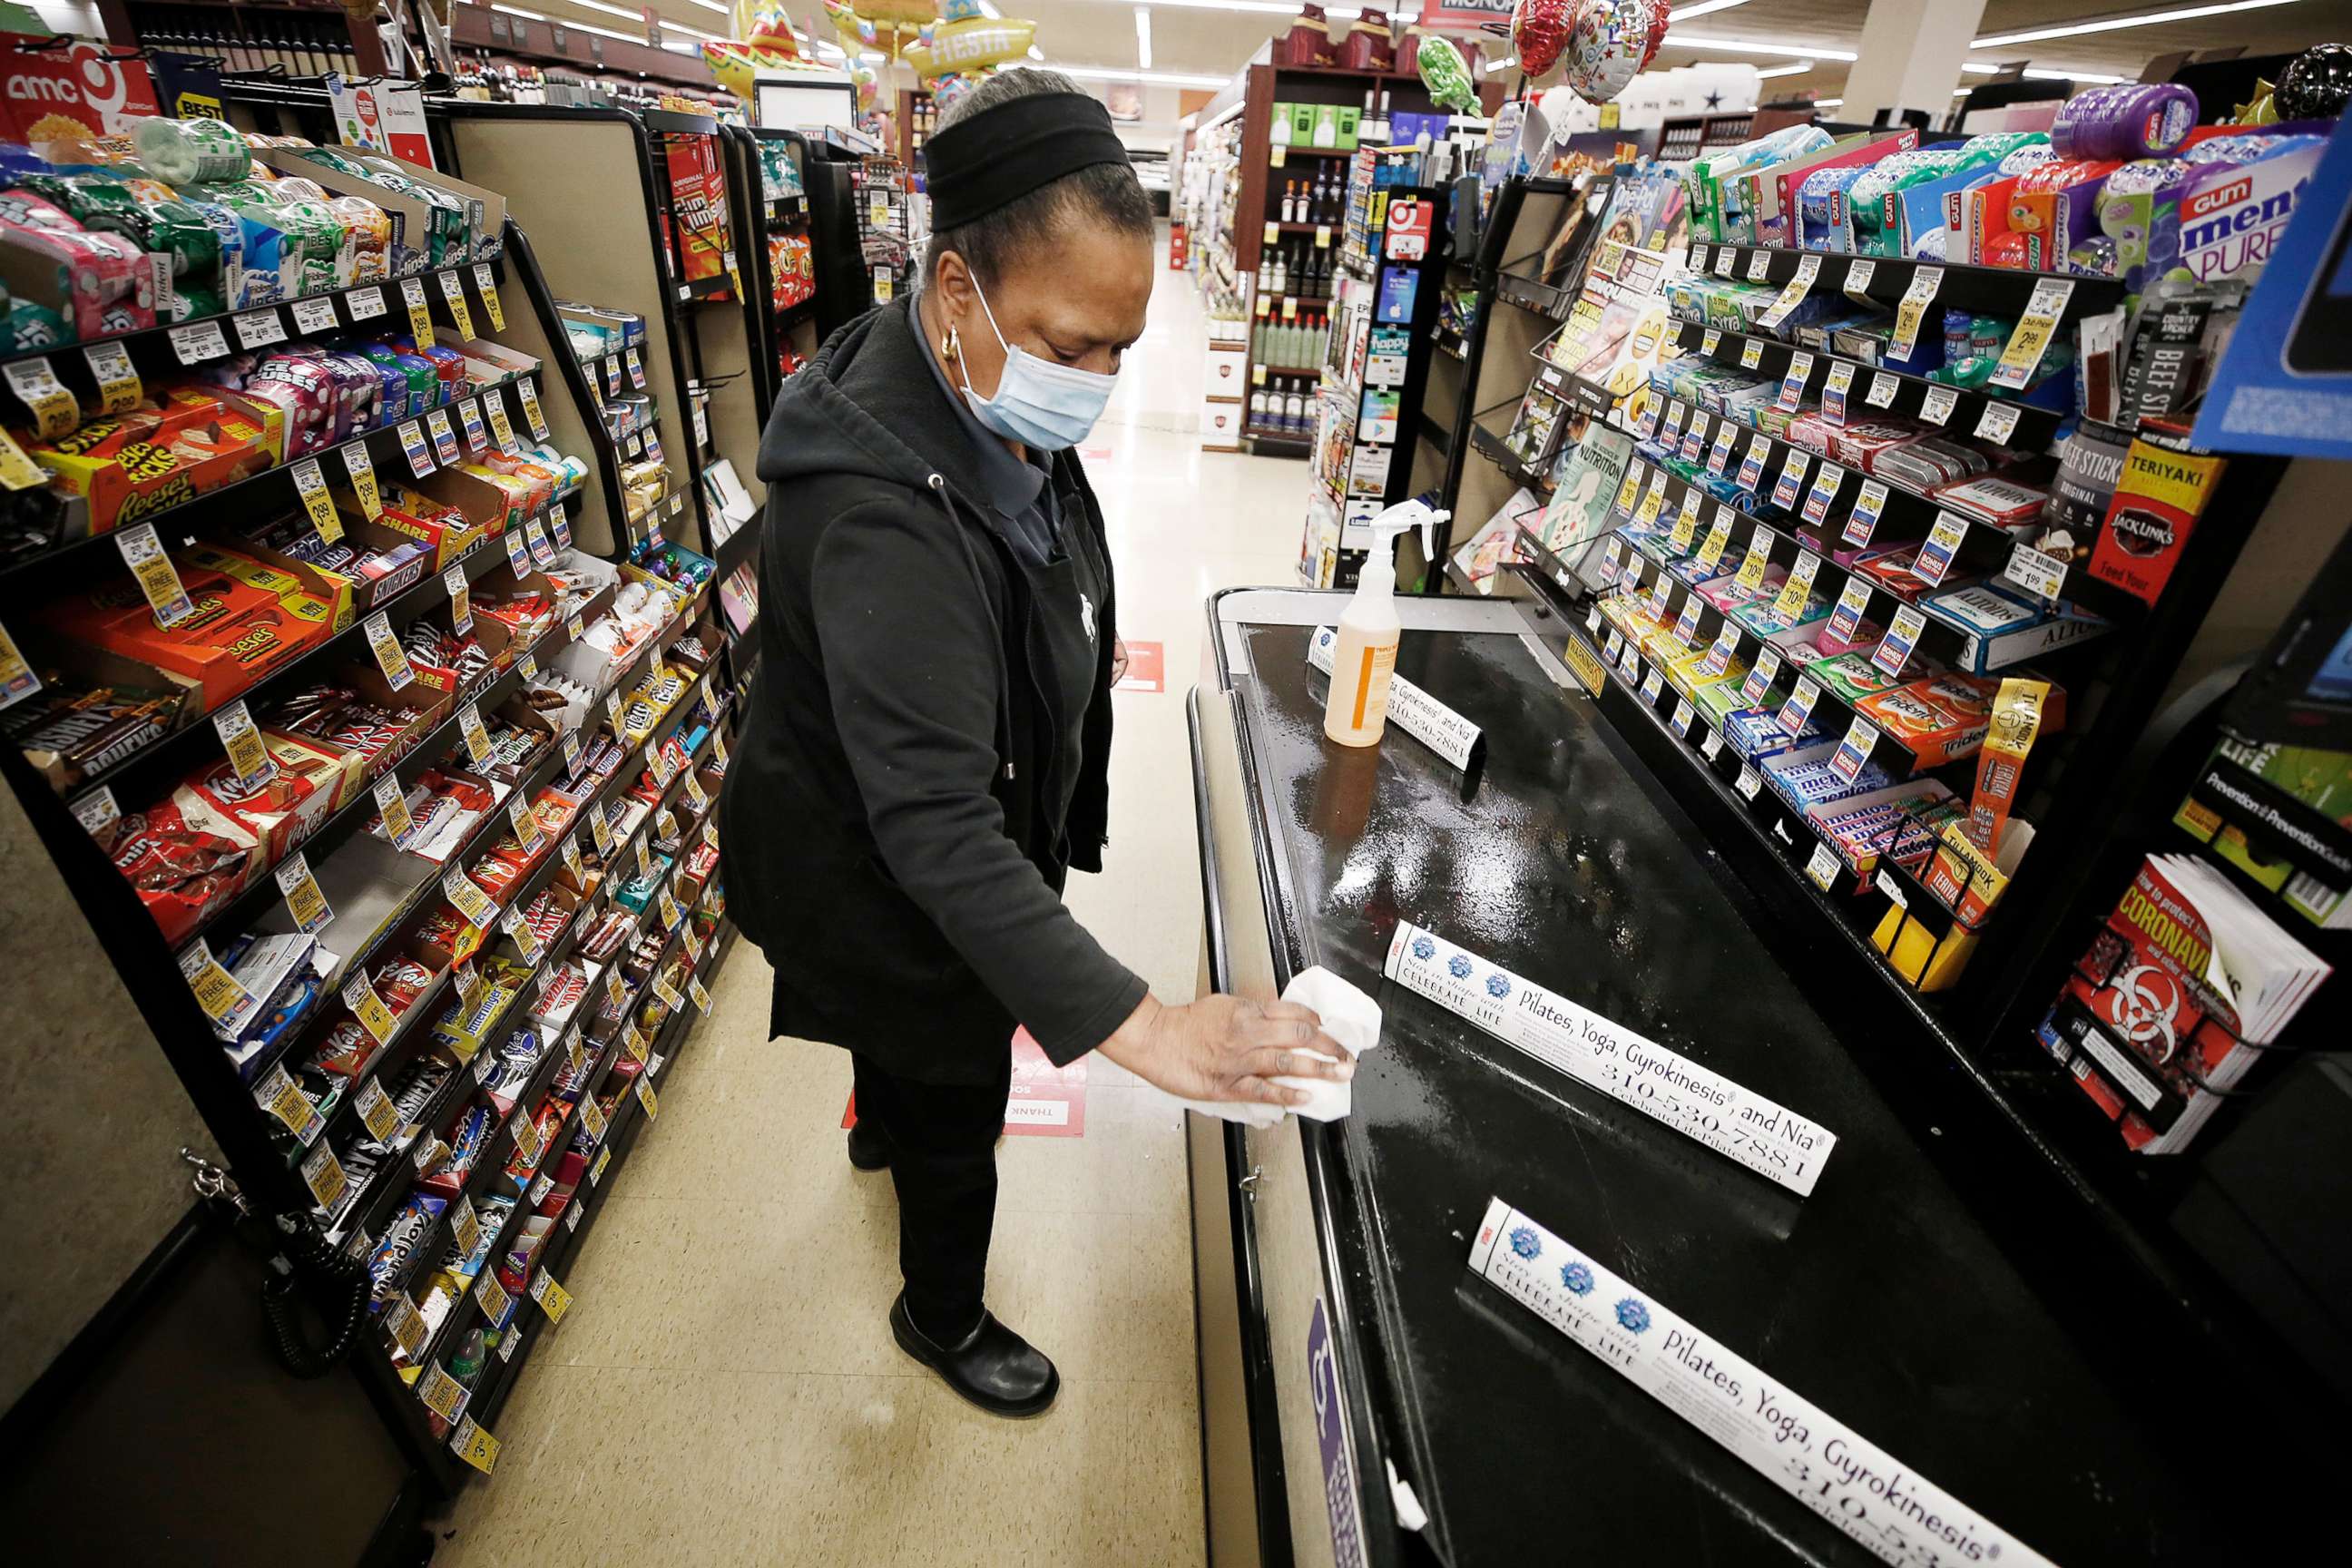 PHOTO: A cashier sanitizes a checkout lane with candy rack displays available at a Vons supermarket in Torrance, Calif., April 27, 2020.